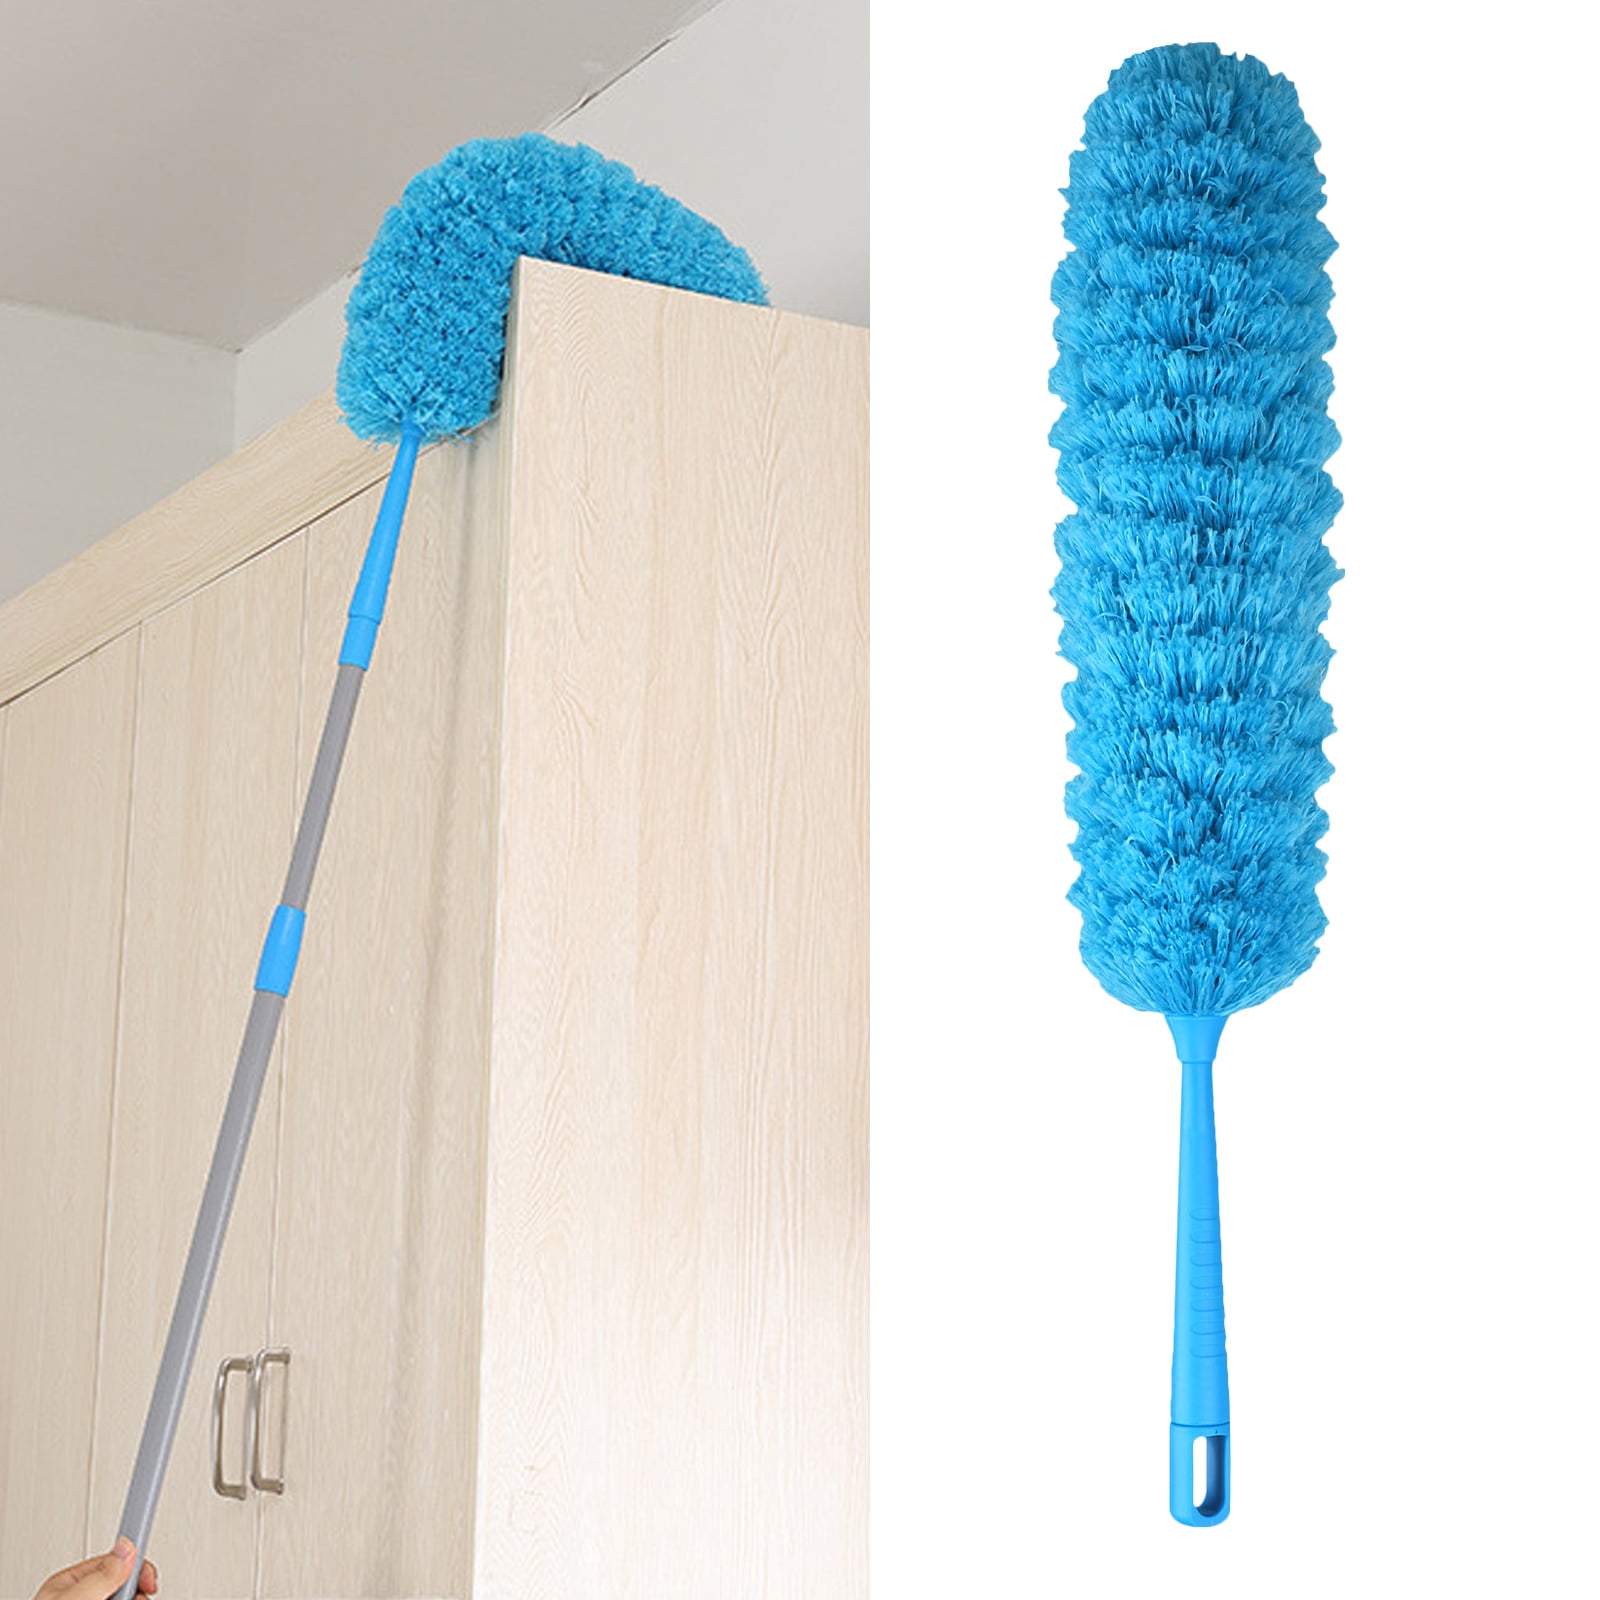 Dark Blue Extendable Duster for Cleaning High Ceiling Fan Microfiber Duster with Extension Pole Interior Roof Cobweb Gap Dust- Wet or Dry Use Extra Long 100 inches with Bendable Head